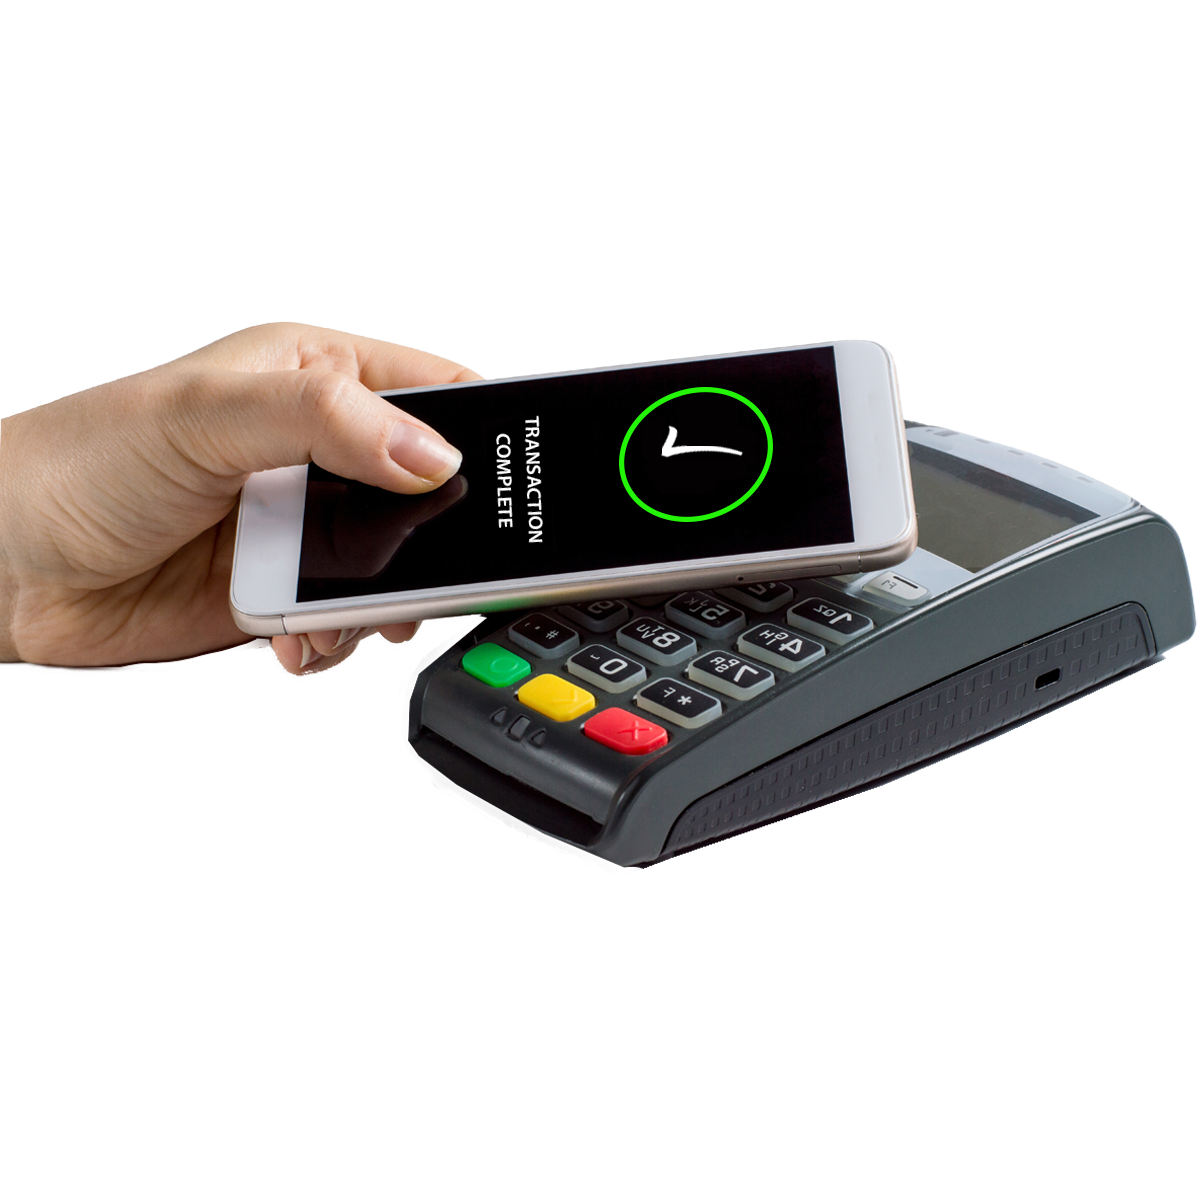 paying use mobile phone at a card reader